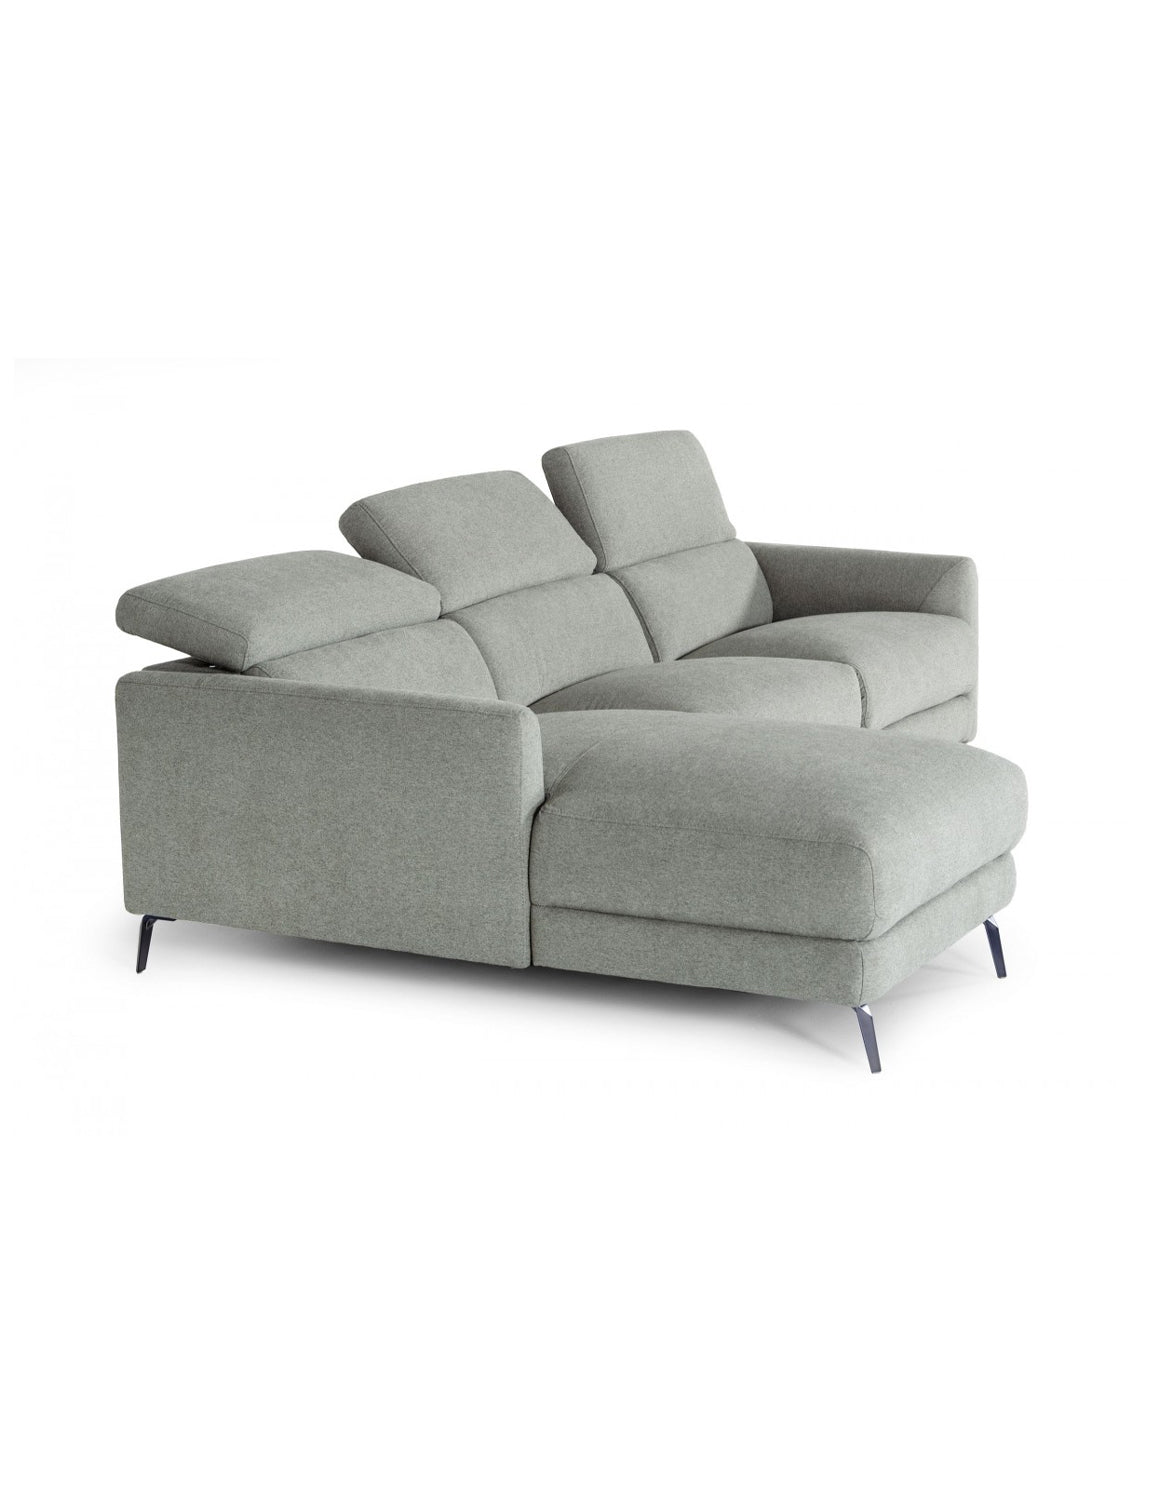 #style_left arm facing chaise